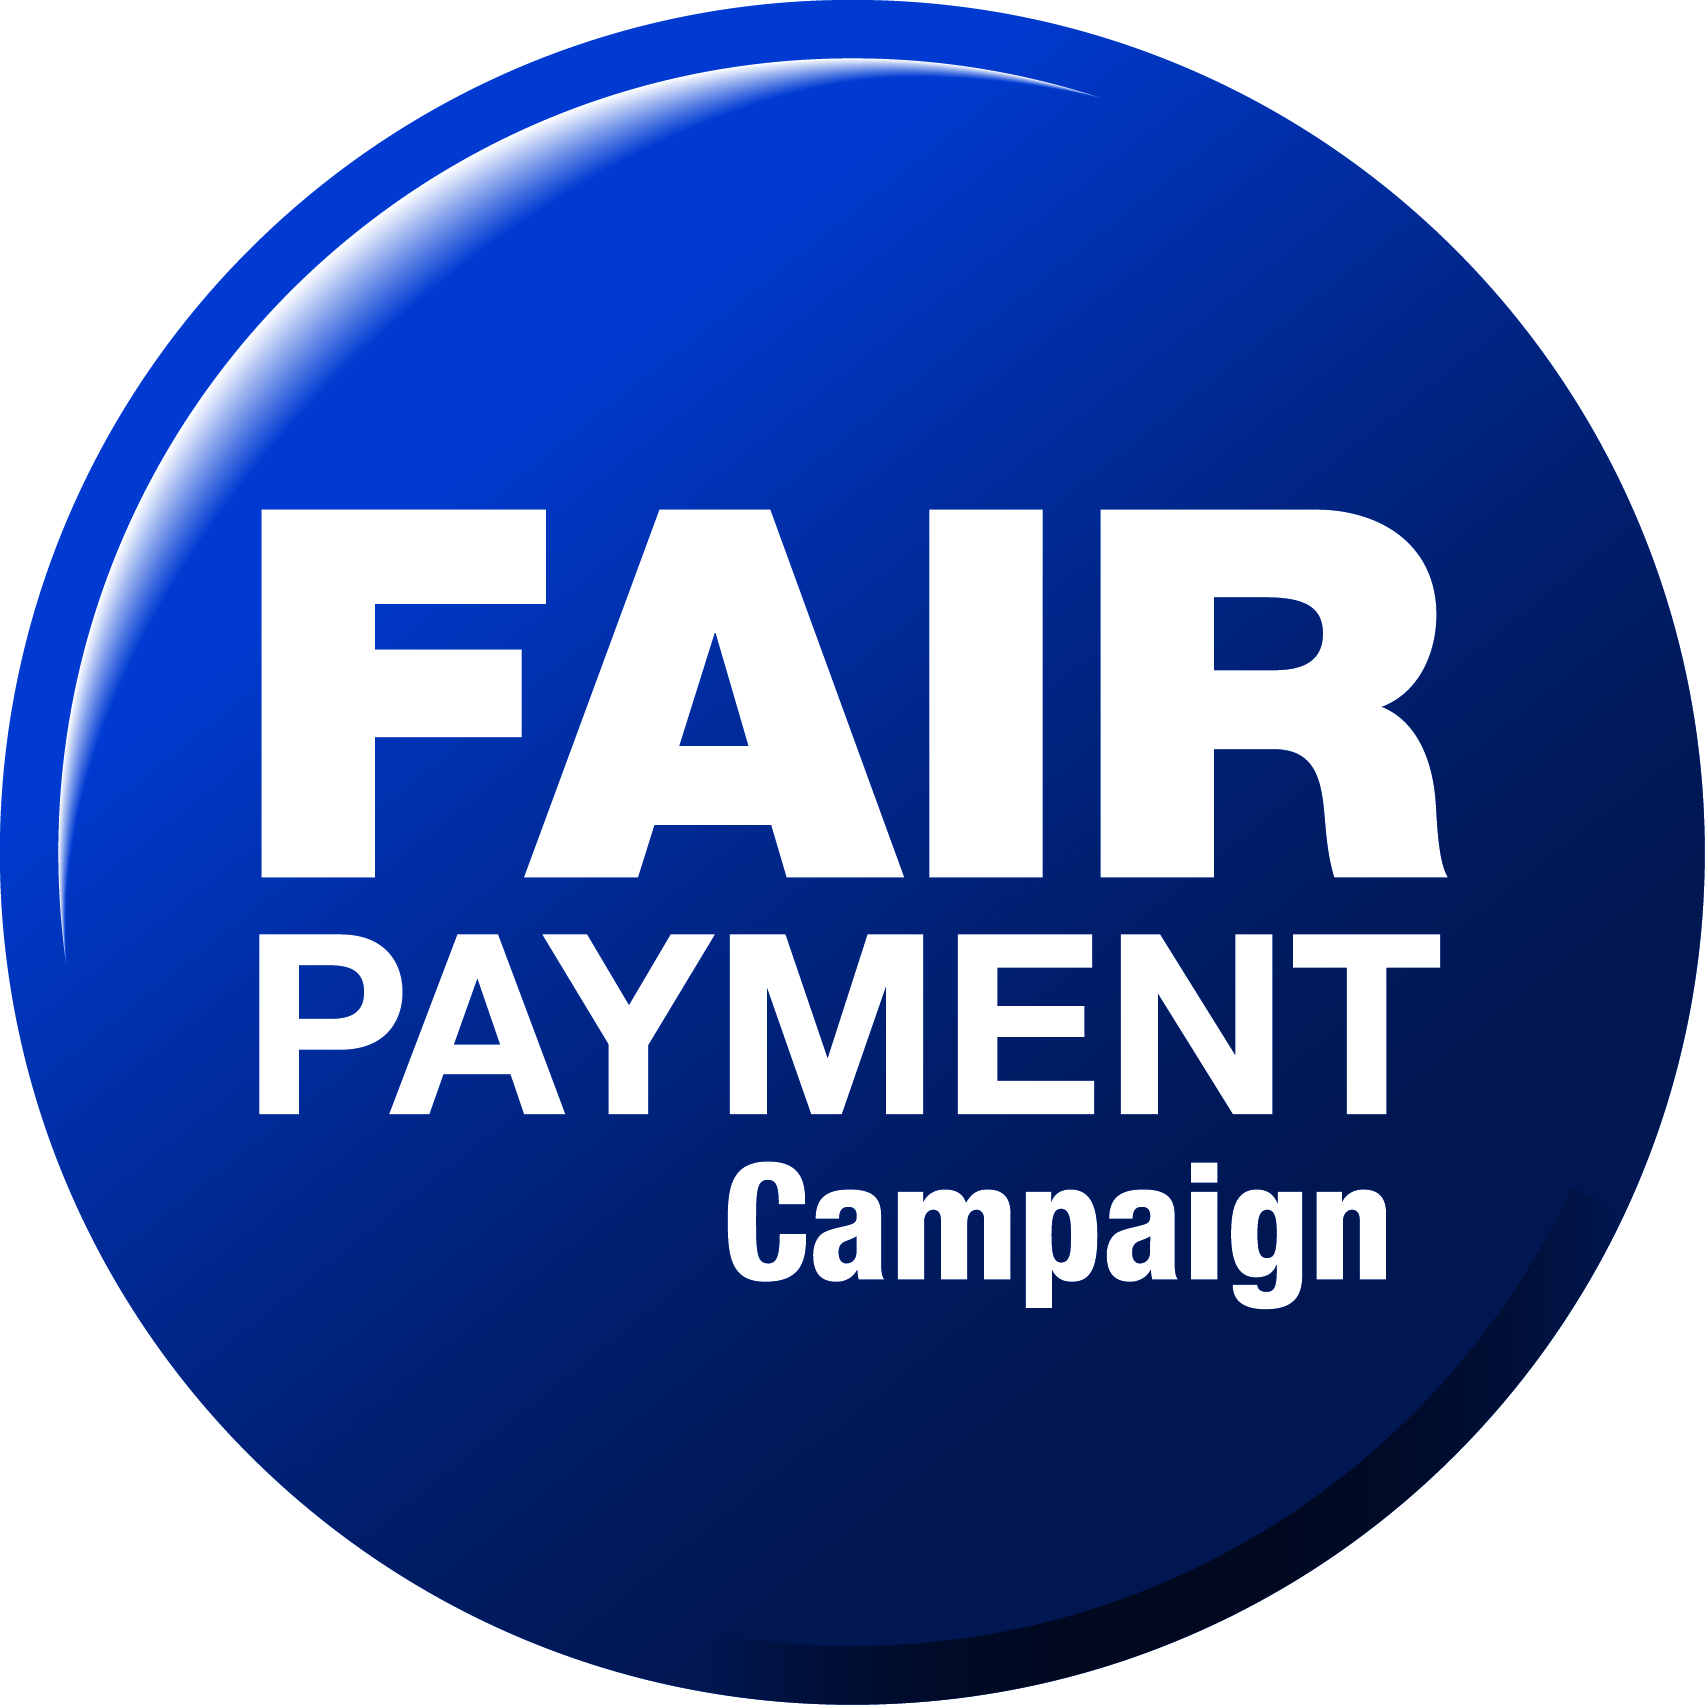 The Fair Payment Campaign